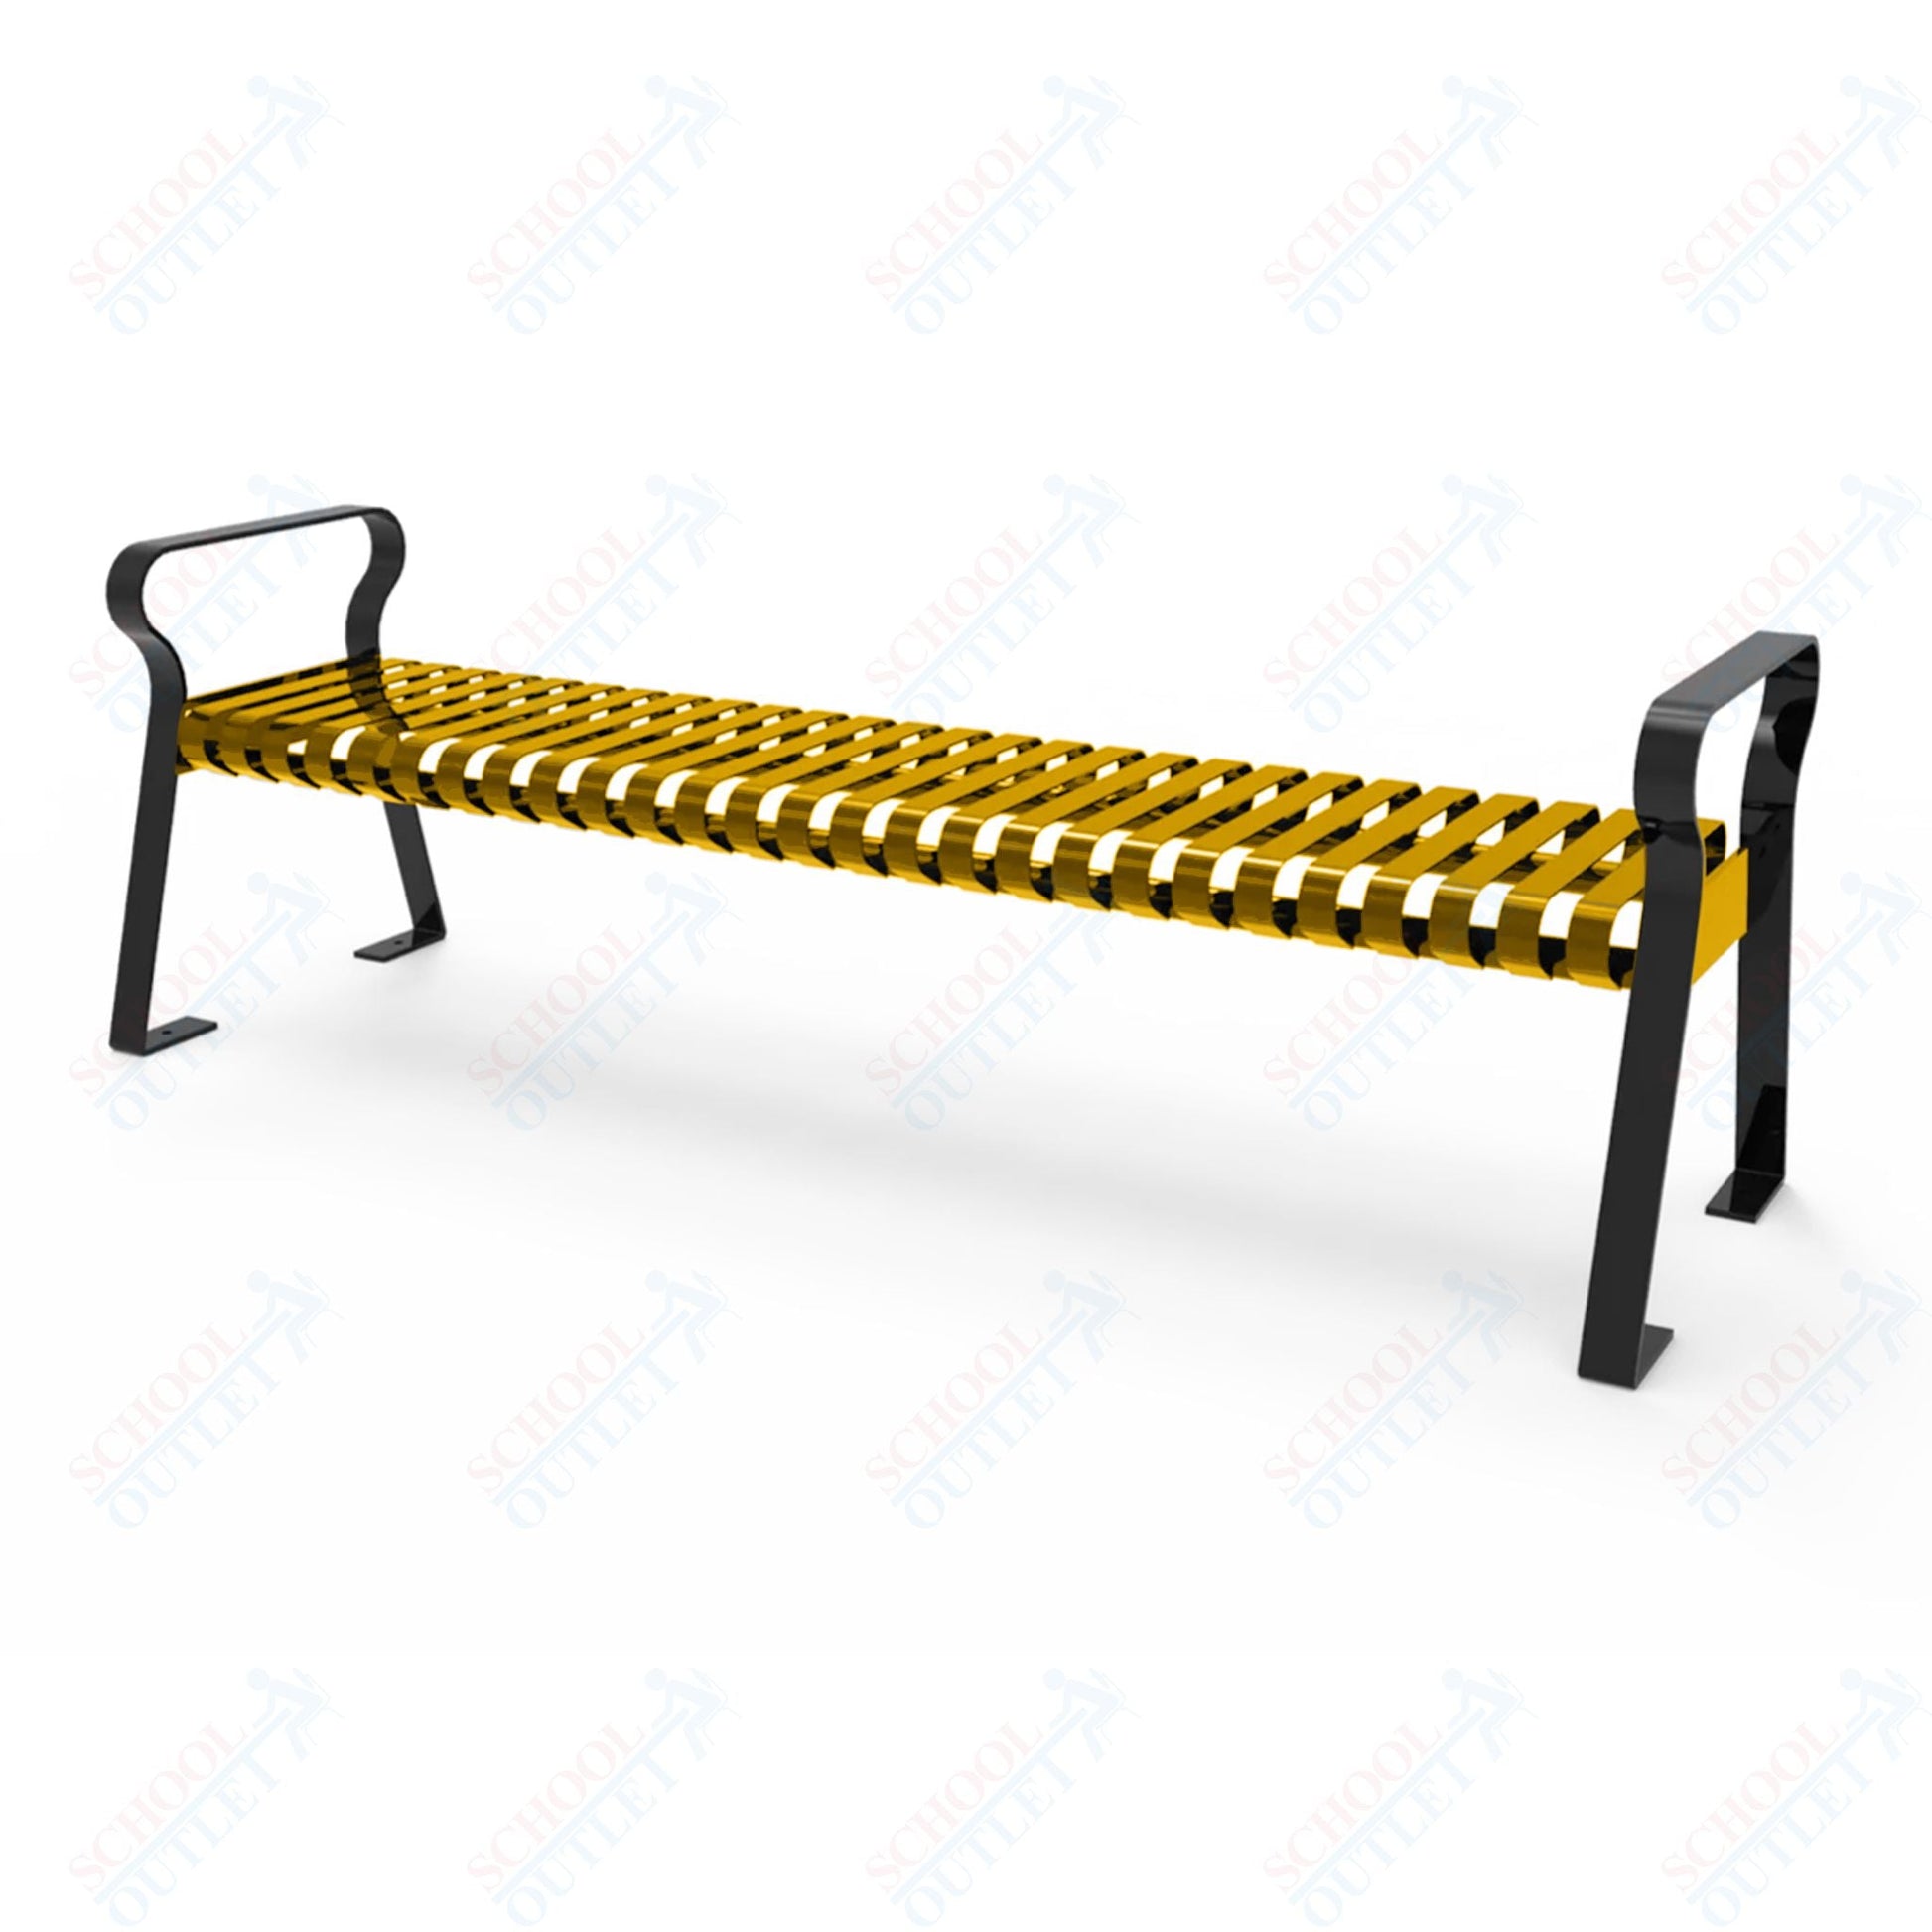 MyTcoat - Downtown Outdoor Bench Without back - Strap Metal - Portable or Surface Mount 6' L (MYT - BDT06 - K - 56) - SchoolOutlet